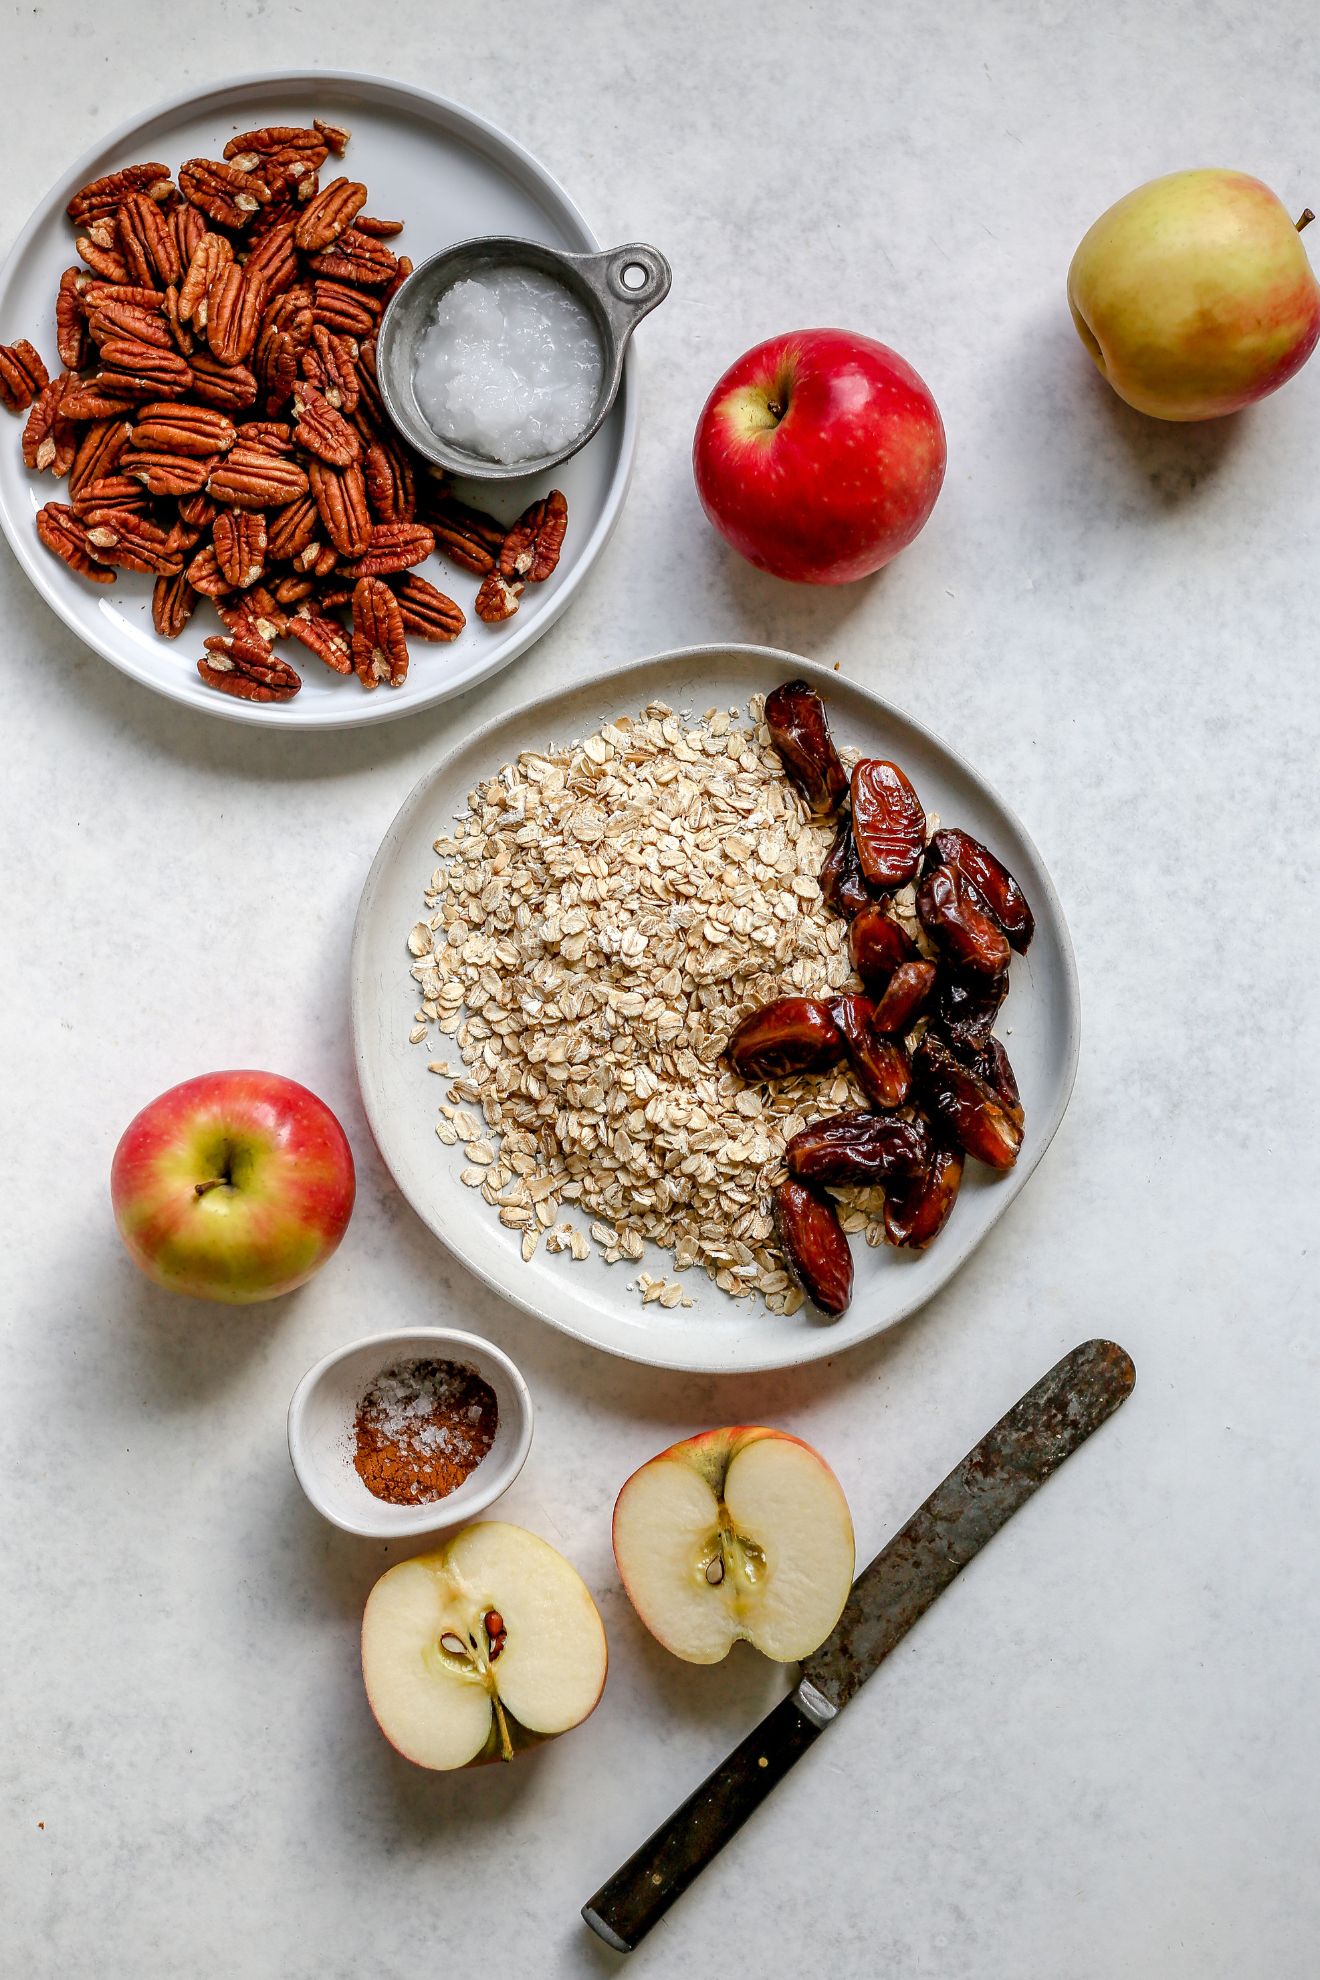 This is an overhead image of plates and bowls with assorted ingredients: pecans, coconut oil, apples, oats, dates, and spices. There is an apple cut in half toward the bottom of the image with an antique butter knife